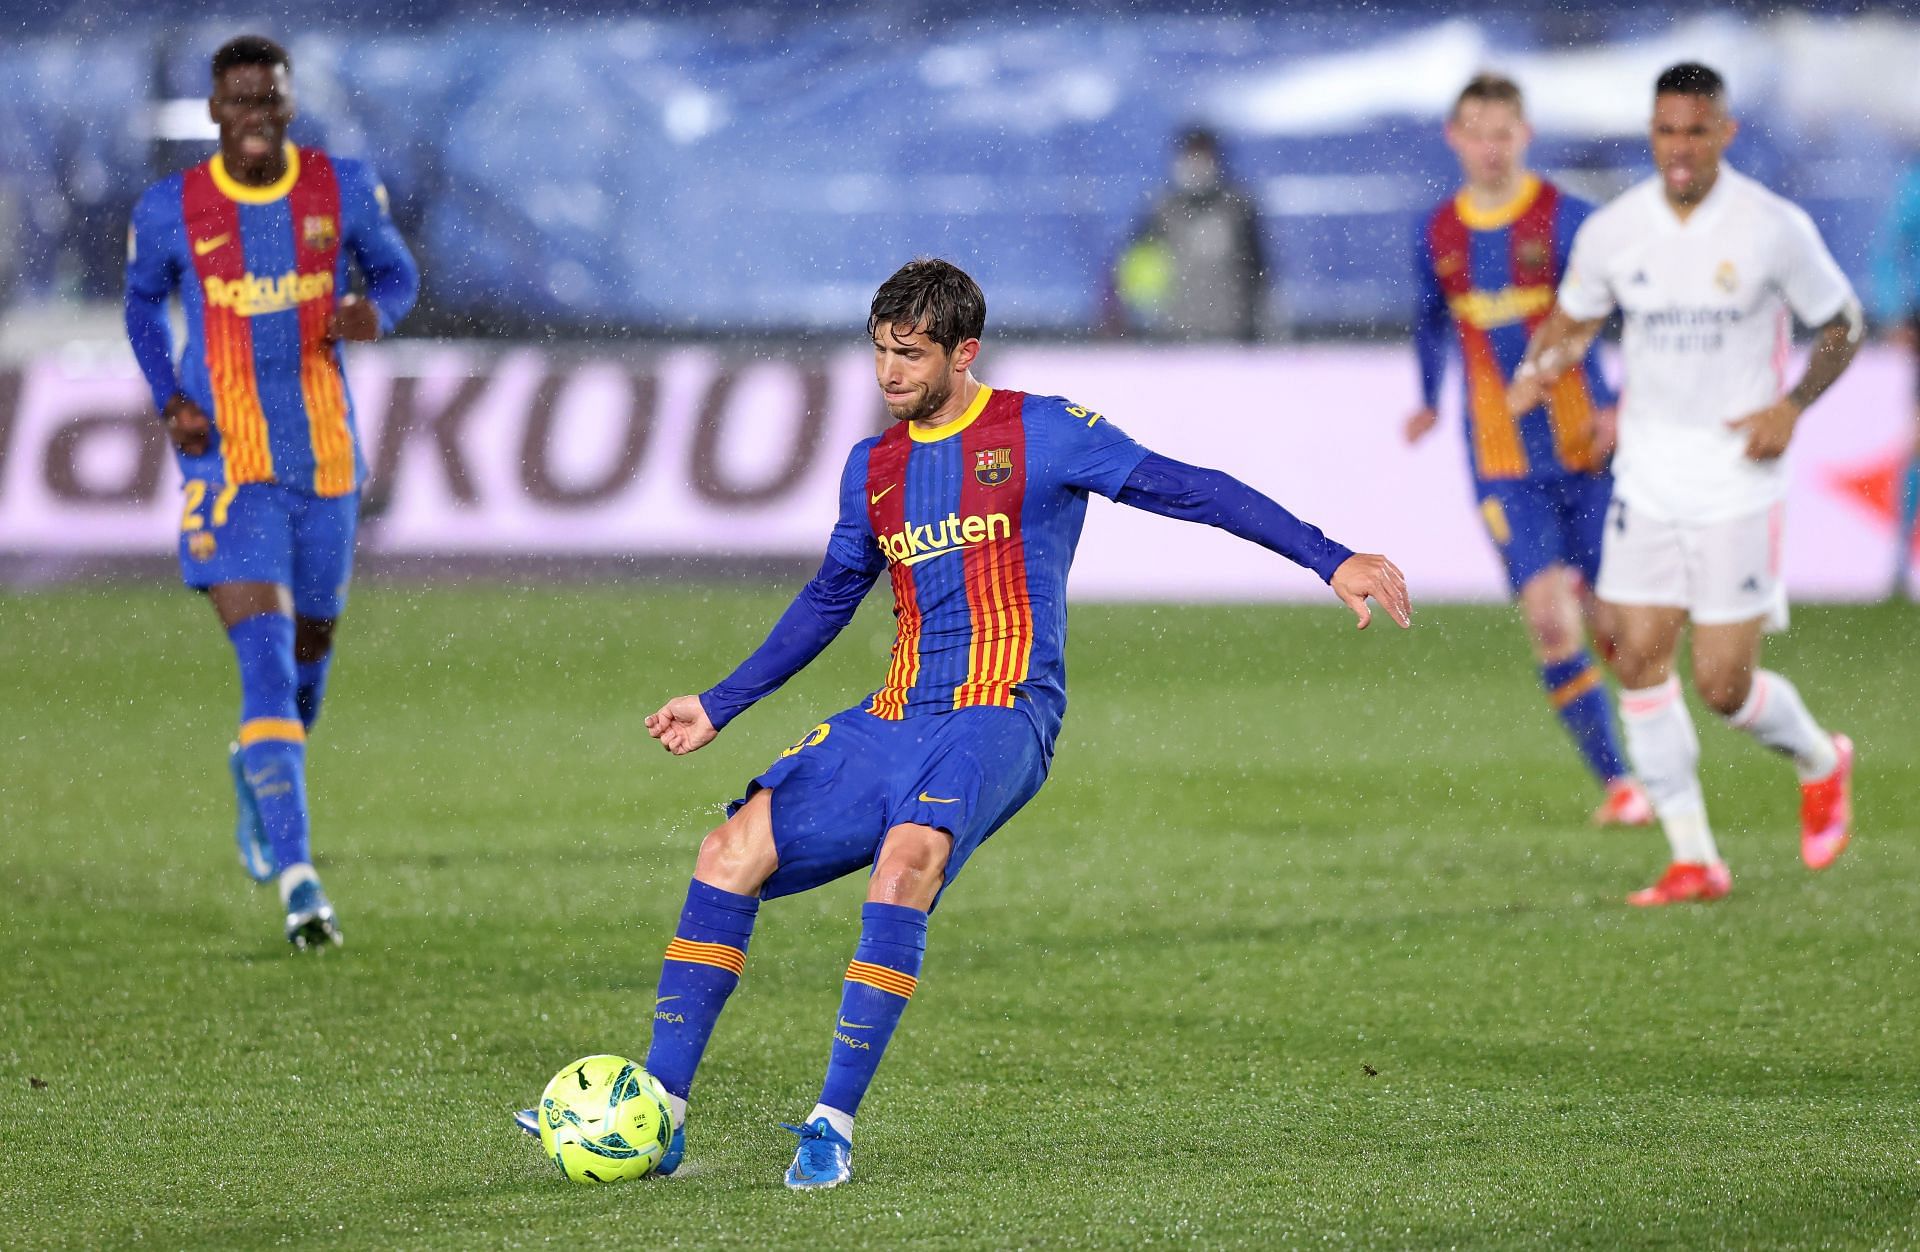 Arsenal face competition from Manchester City for the signature of Sergi Roberto.